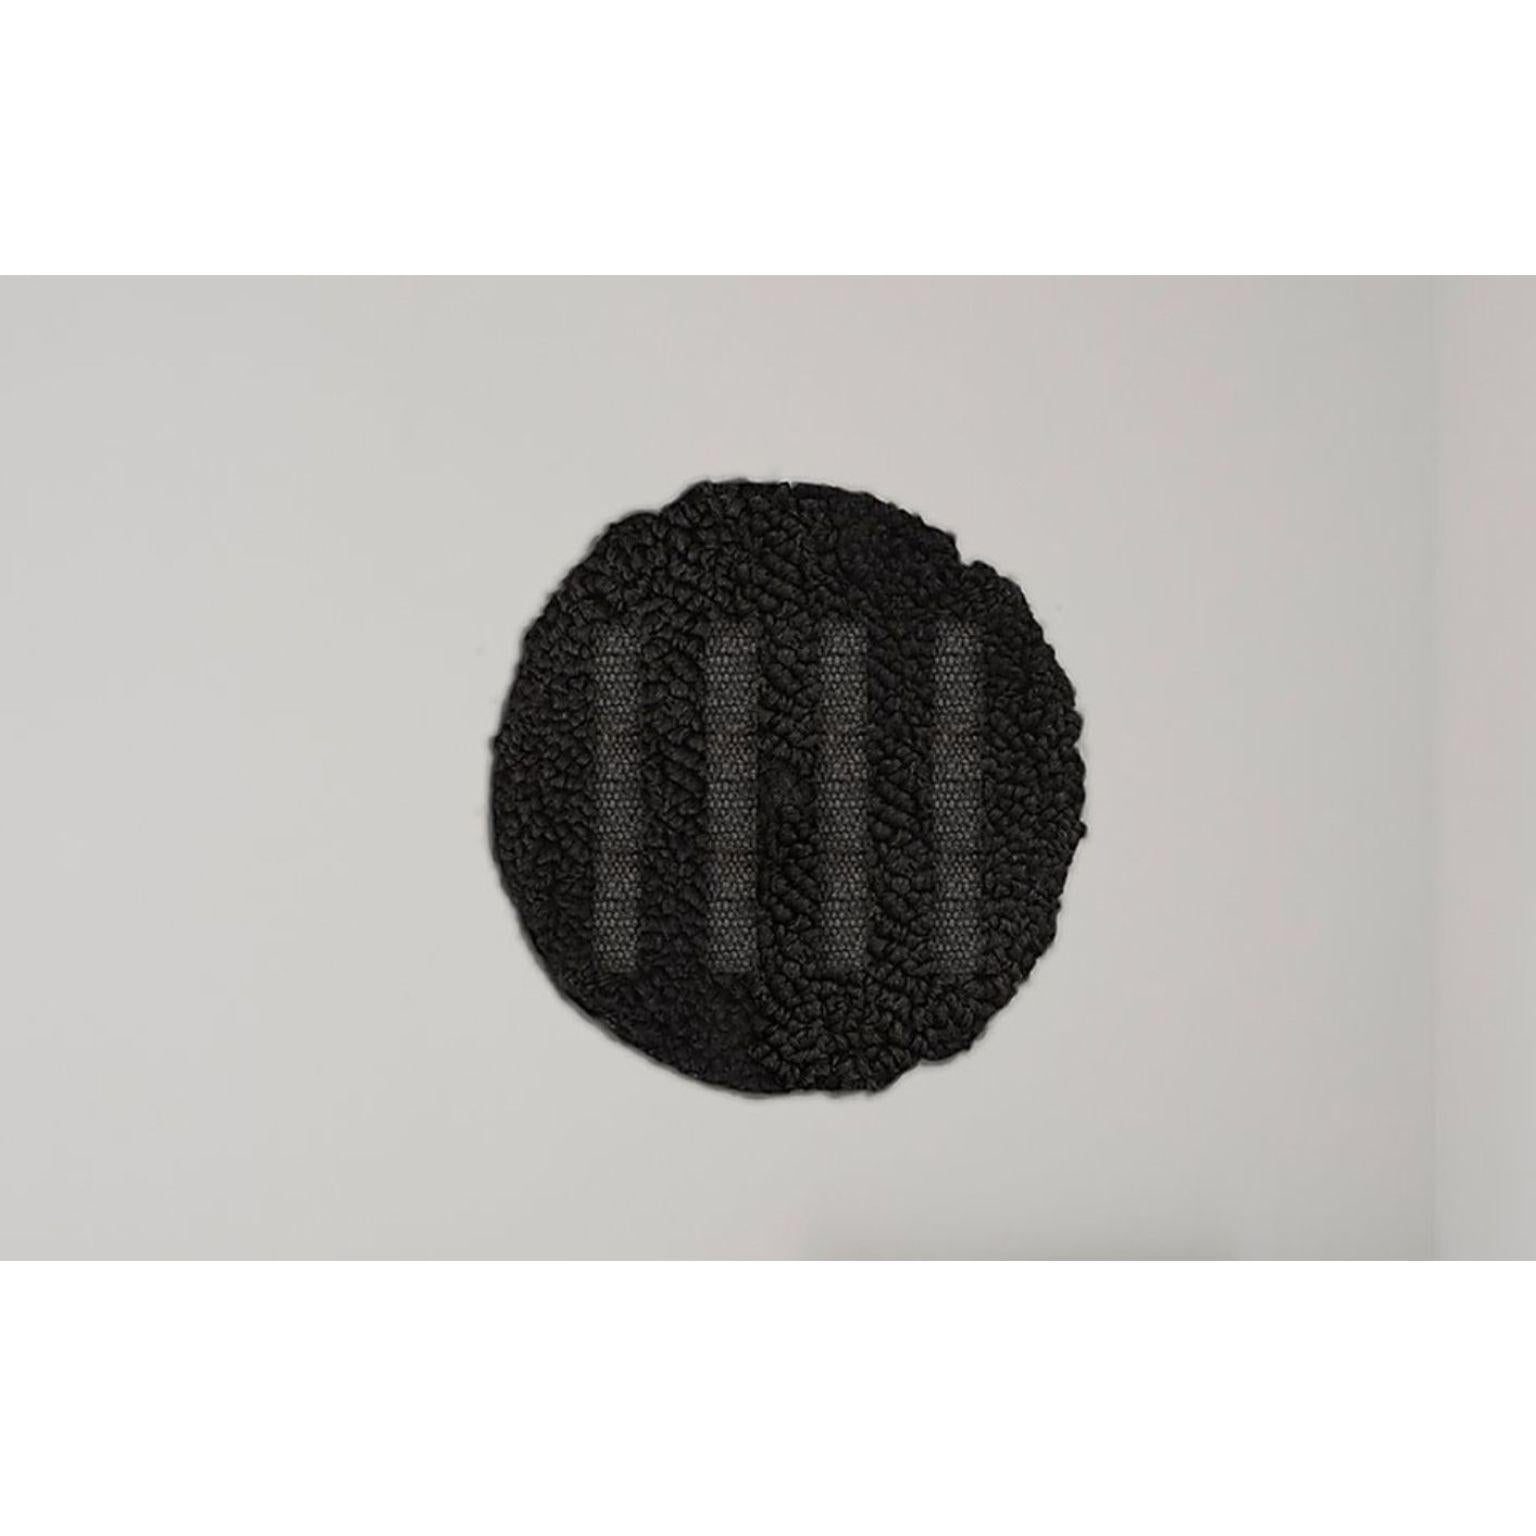 Contemporary tapestry by FAINA
Design: Victoriya Yakusha
Material: Wool
Dimensions: Diameter 100 x 4 cm

In search of new-old design messages, Victoria Yakusha conducted a study of the daily traditions of our ancestors. The times of Trypillia and